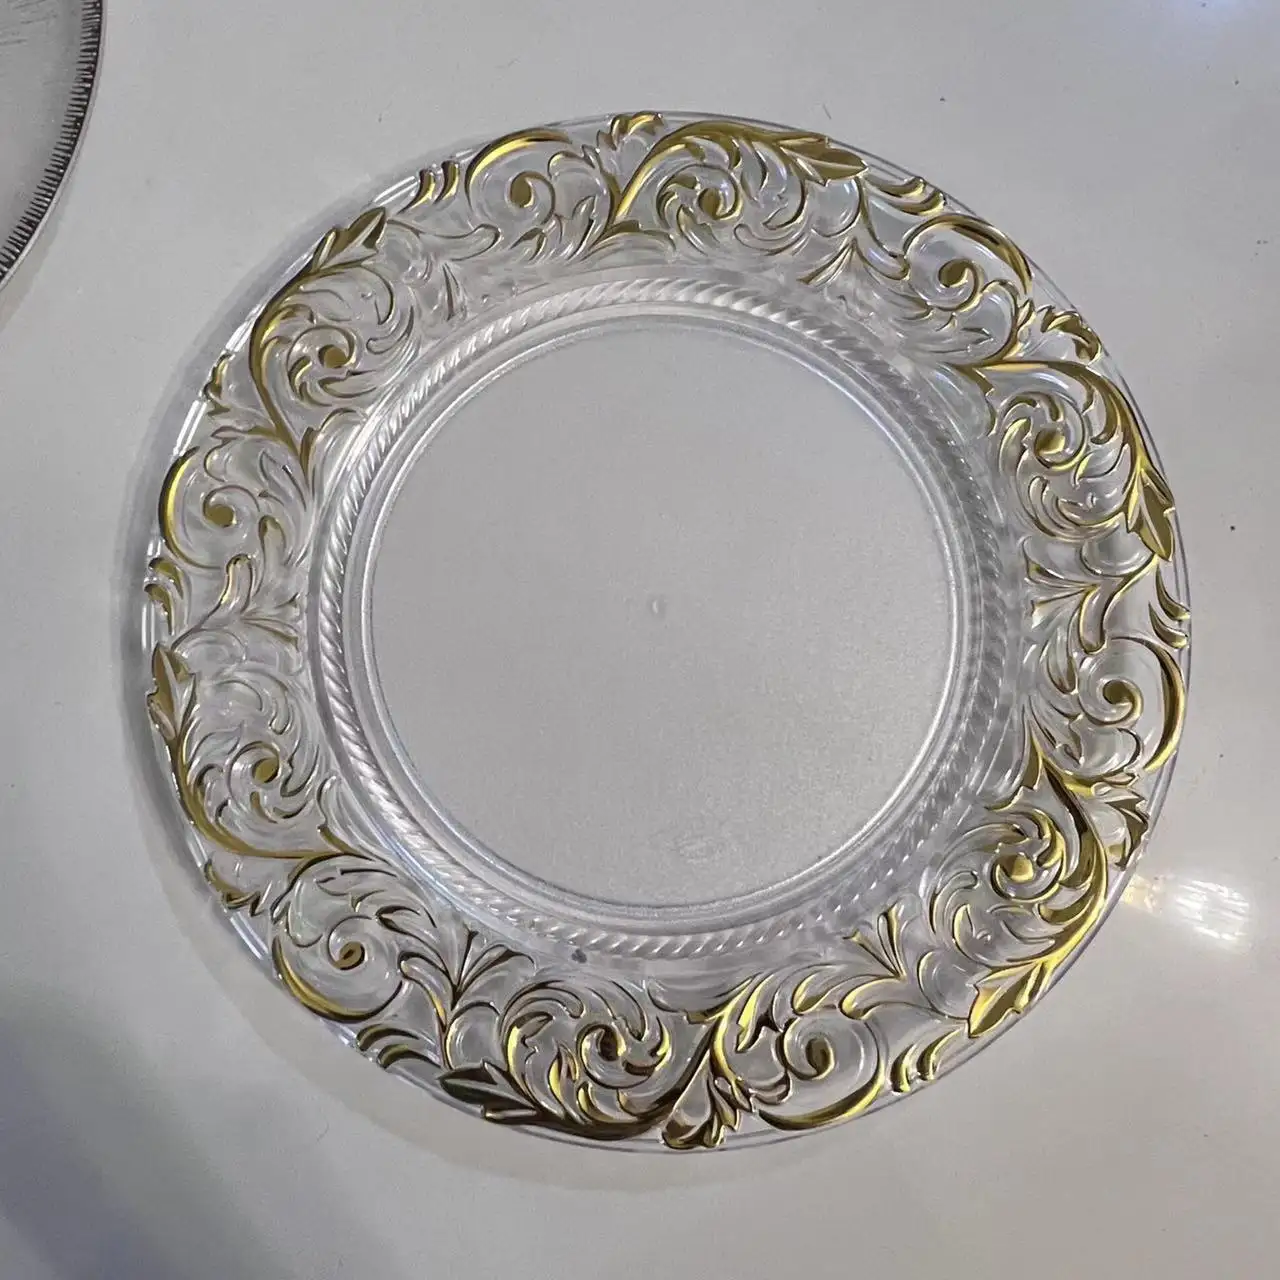 BST Elegant Tableware Decoration 13 inch wholesale luxury clear acrylic gold charger plates for dinner plates